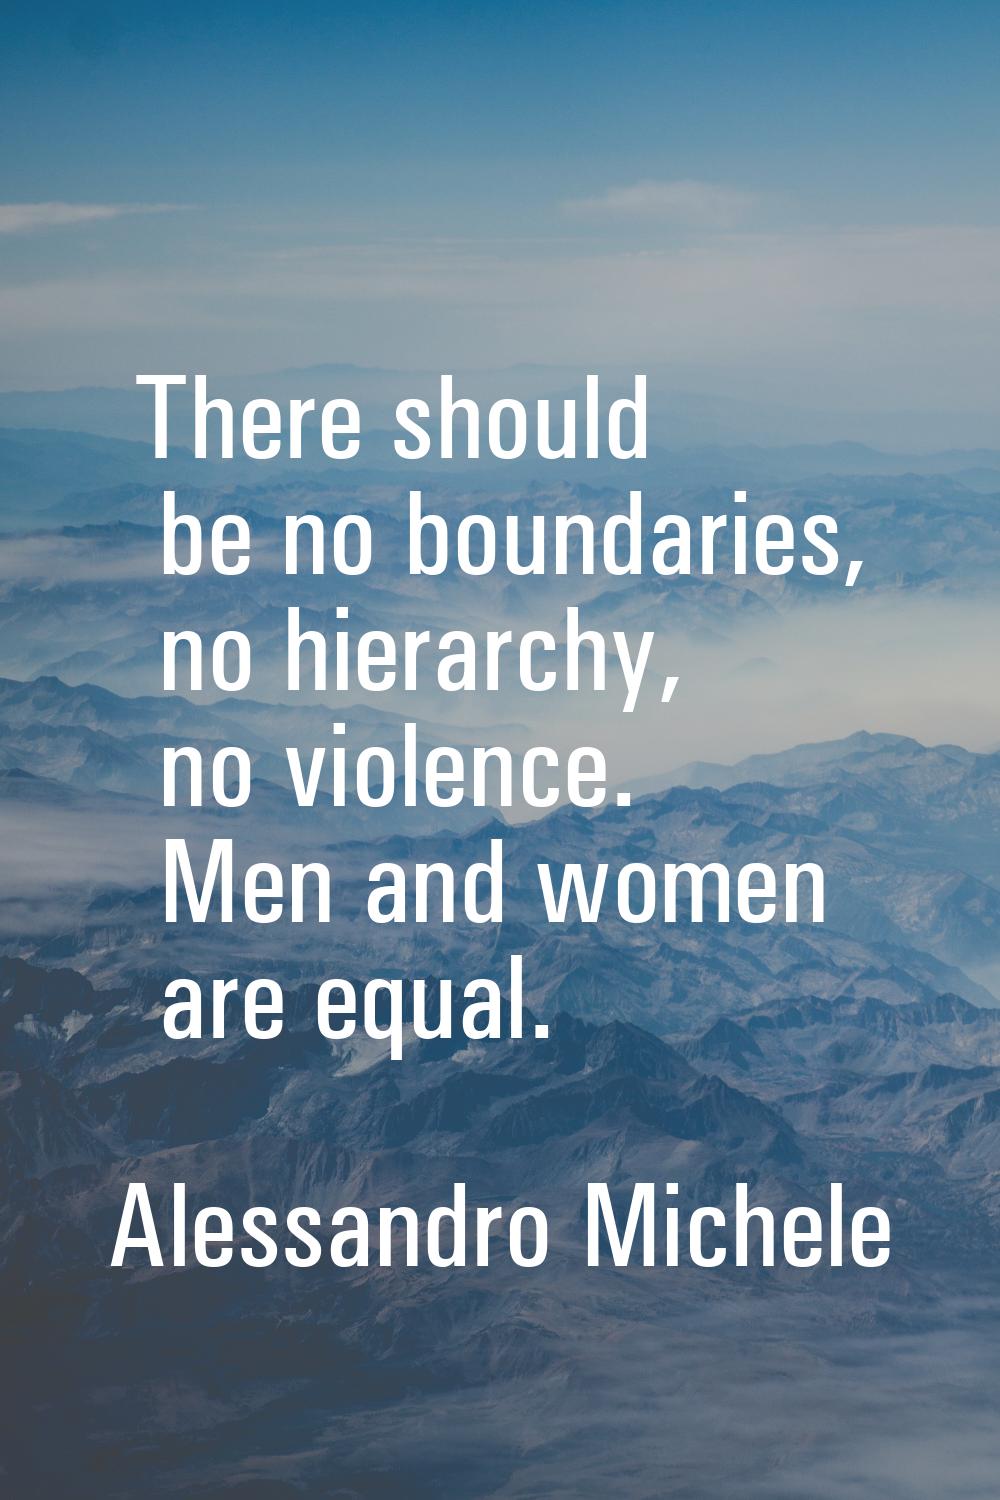 There should be no boundaries, no hierarchy, no violence. Men and women are equal.